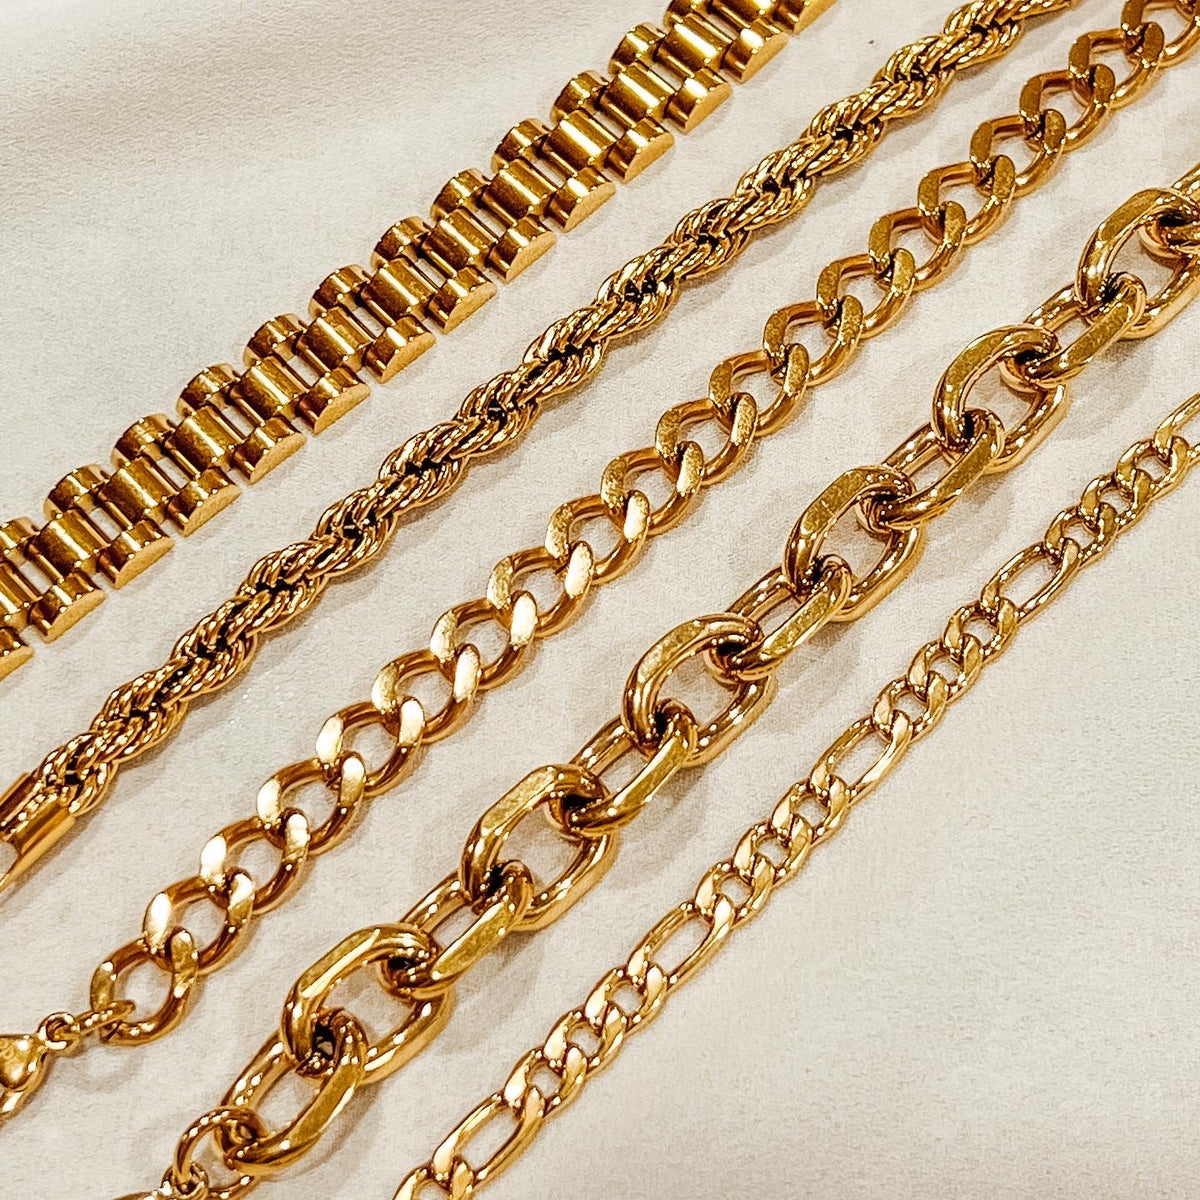 5 Essential Gold Jewelry Pieces Every Woman Should Own: From Classic to Trendy